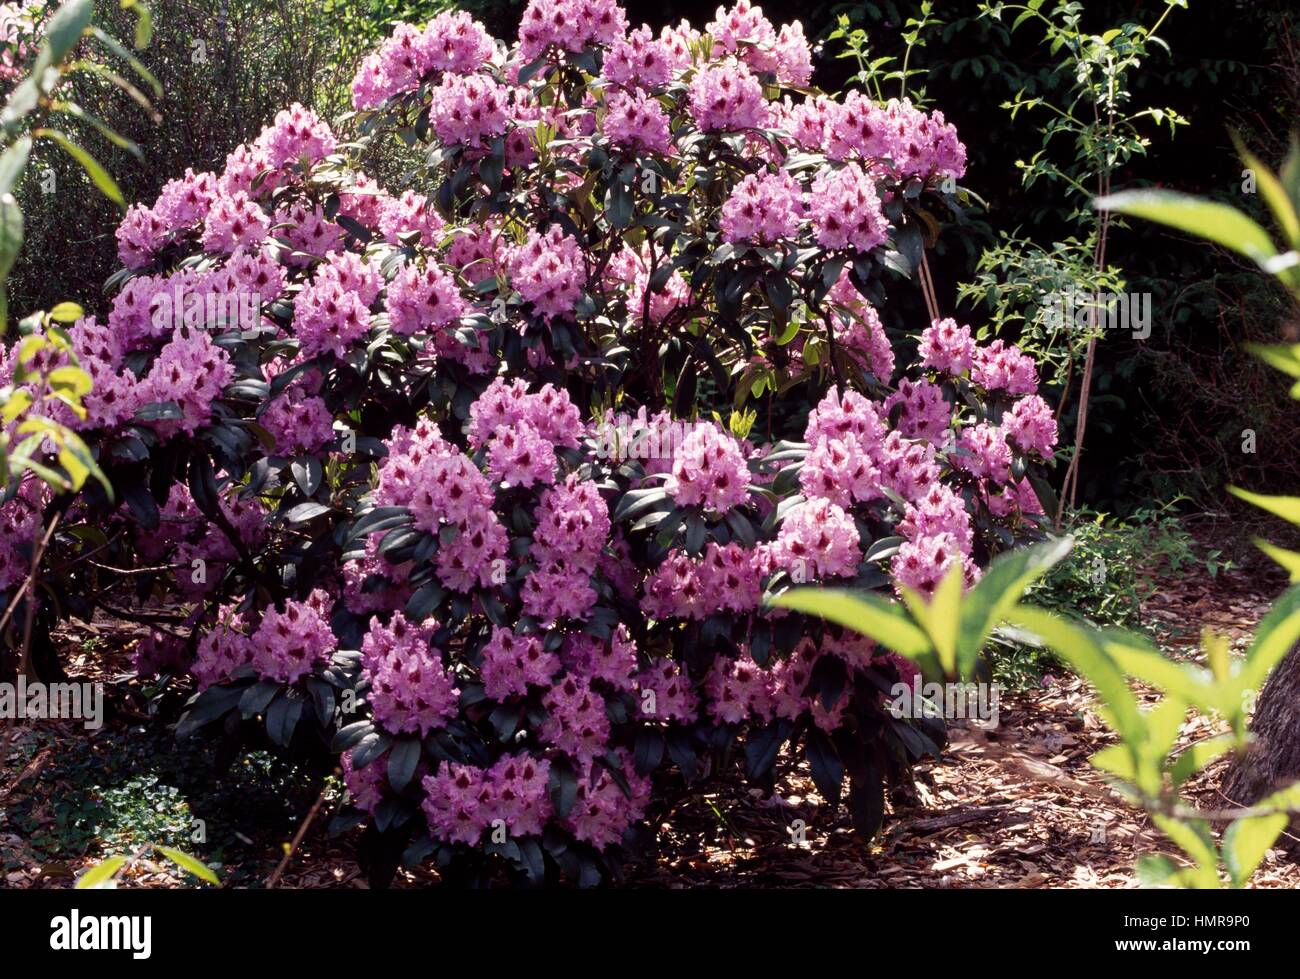 Rhododendron (Rhododendron Blue Peter), Ericaceae. Stock Photo